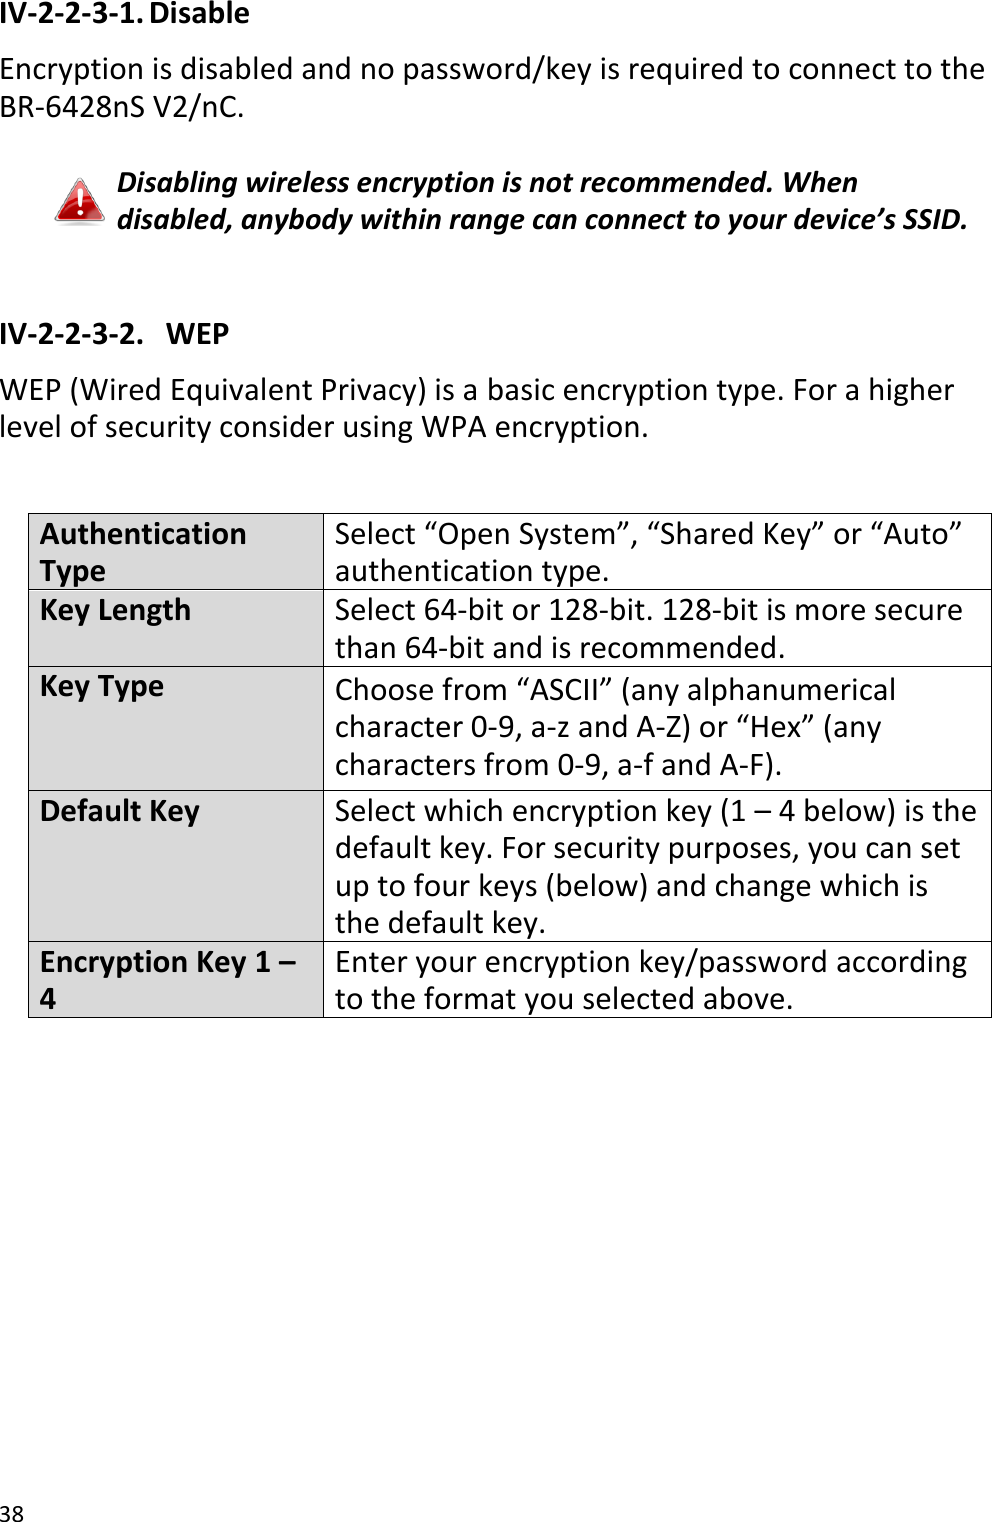 38  IV-2-2-3-1. Disable Encryption is disabled and no password/key is required to connect to the BR-6428nS V2/nC.  Disabling wireless encryption is not recommended. When disabled, anybody within range can connect to your device’s SSID.  IV-2-2-3-2.   WEP WEP (Wired Equivalent Privacy) is a basic encryption type. For a higher level of security consider using WPA encryption.   Authentication Type Select “Open System”, “Shared Key” or “Auto” authentication type. Key Length Select 64-bit or 128-bit. 128-bit is more secure than 64-bit and is recommended. Key Type Choose from “ASCII” (any alphanumerical character 0-9, a-z and A-Z) or “Hex” (any characters from 0-9, a-f and A-F). Default Key Select which encryption key (1 – 4 below) is the default key. For security purposes, you can set up to four keys (below) and change which is the default key. Encryption Key 1 – 4 Enter your encryption key/password according to the format you selected above.   